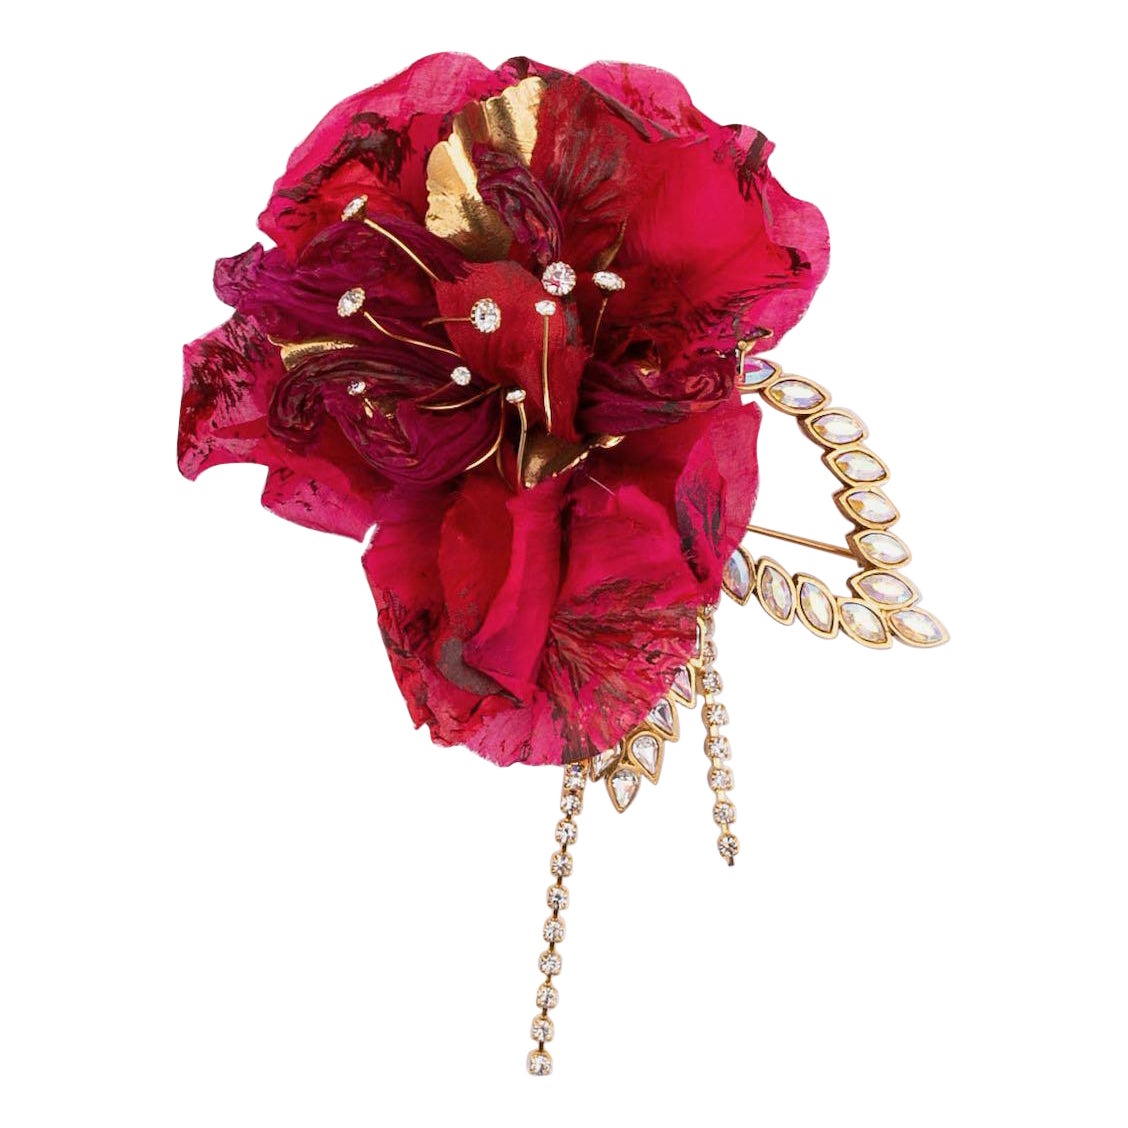 Christian Lacroix Organza Brooch in Gilted Metal